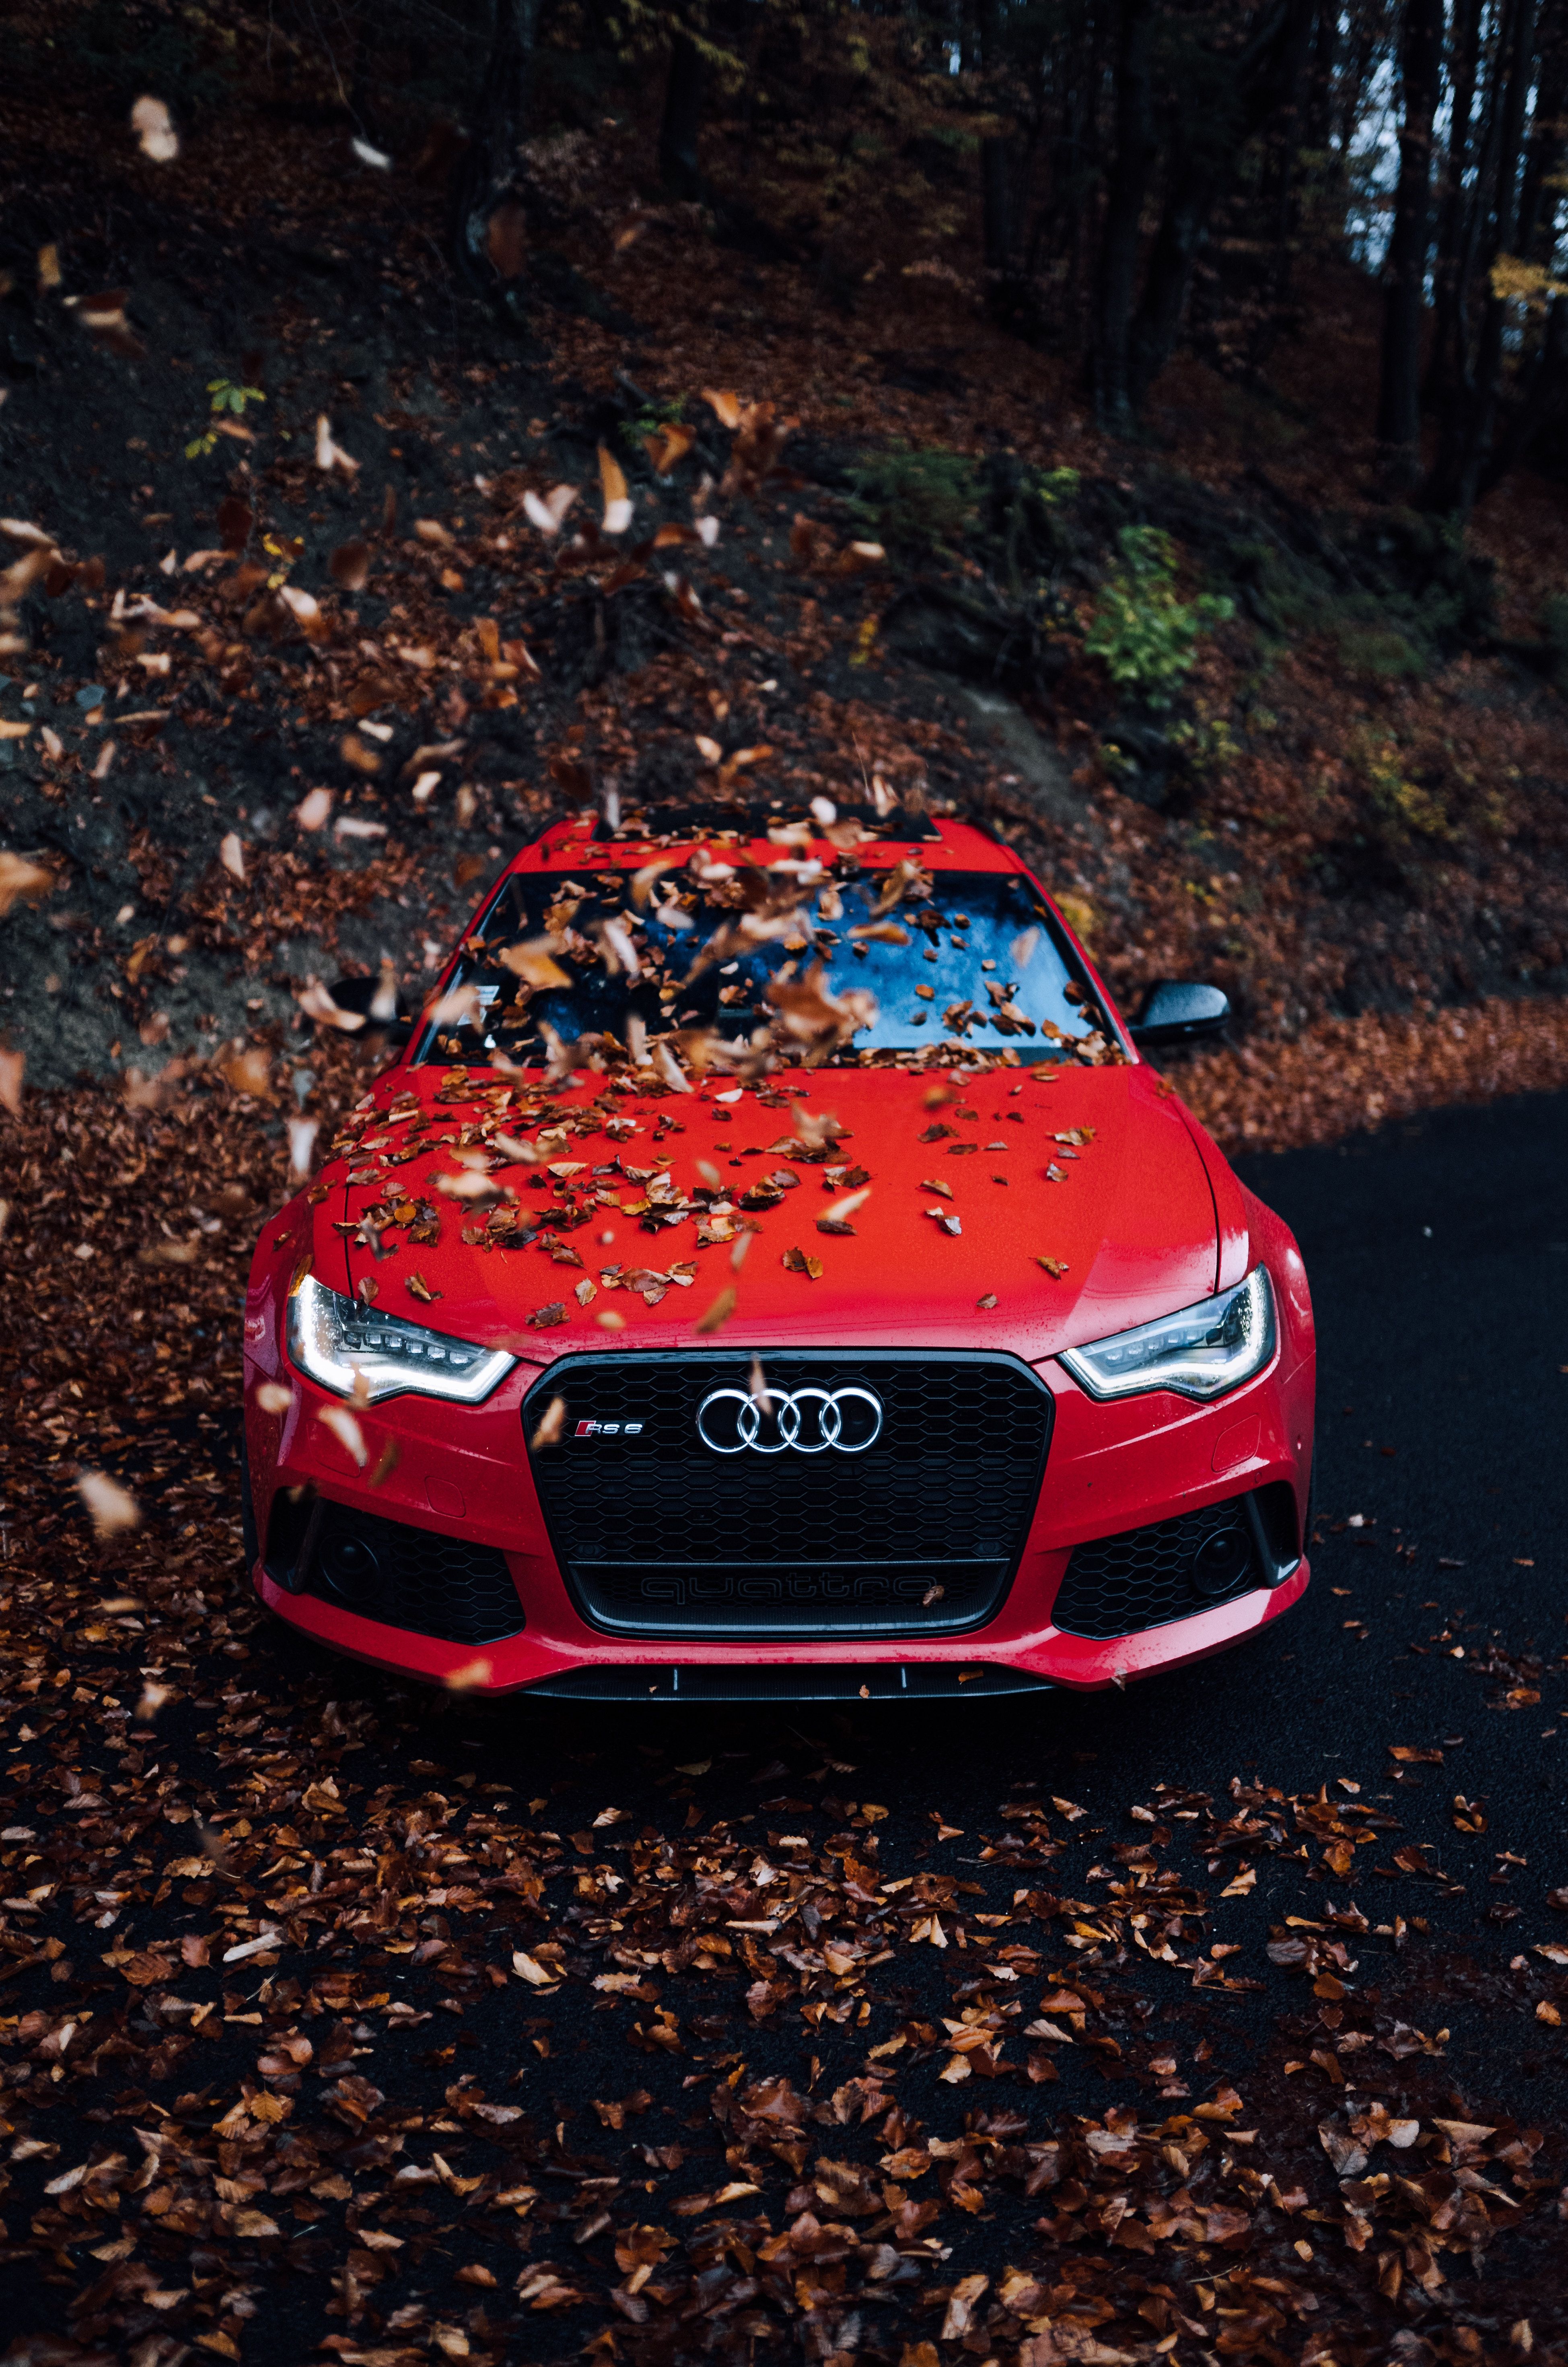 Download wallpaper 3898x5883 audi, car, front view, red, bumper, foliage, autumn HD background